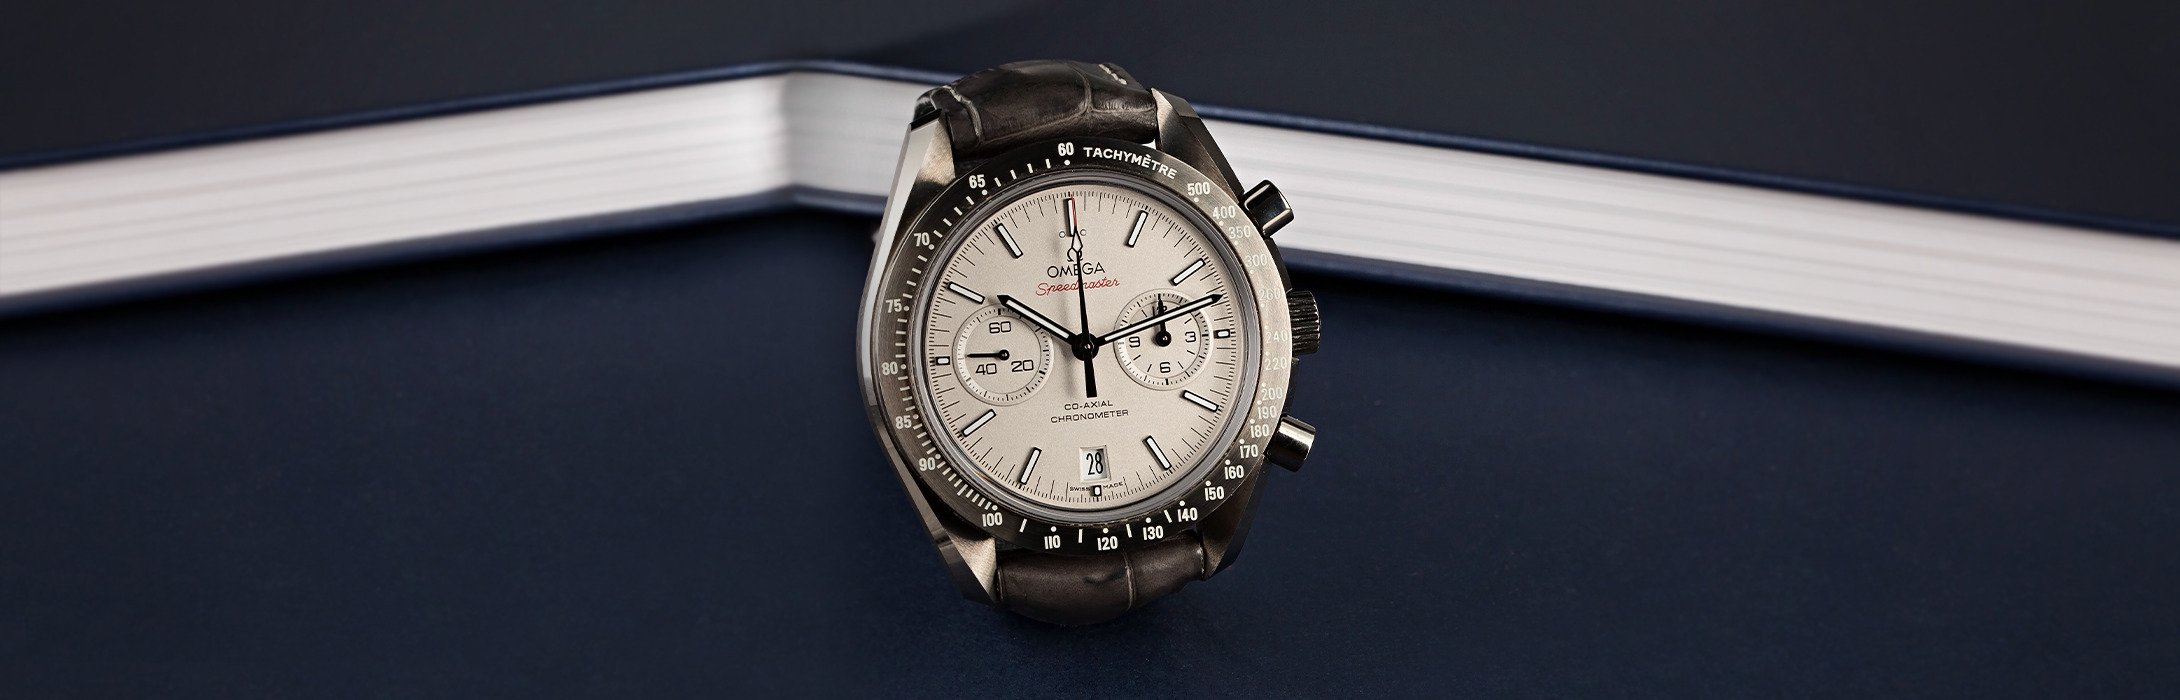 How Much Are Popular Omega Watches?